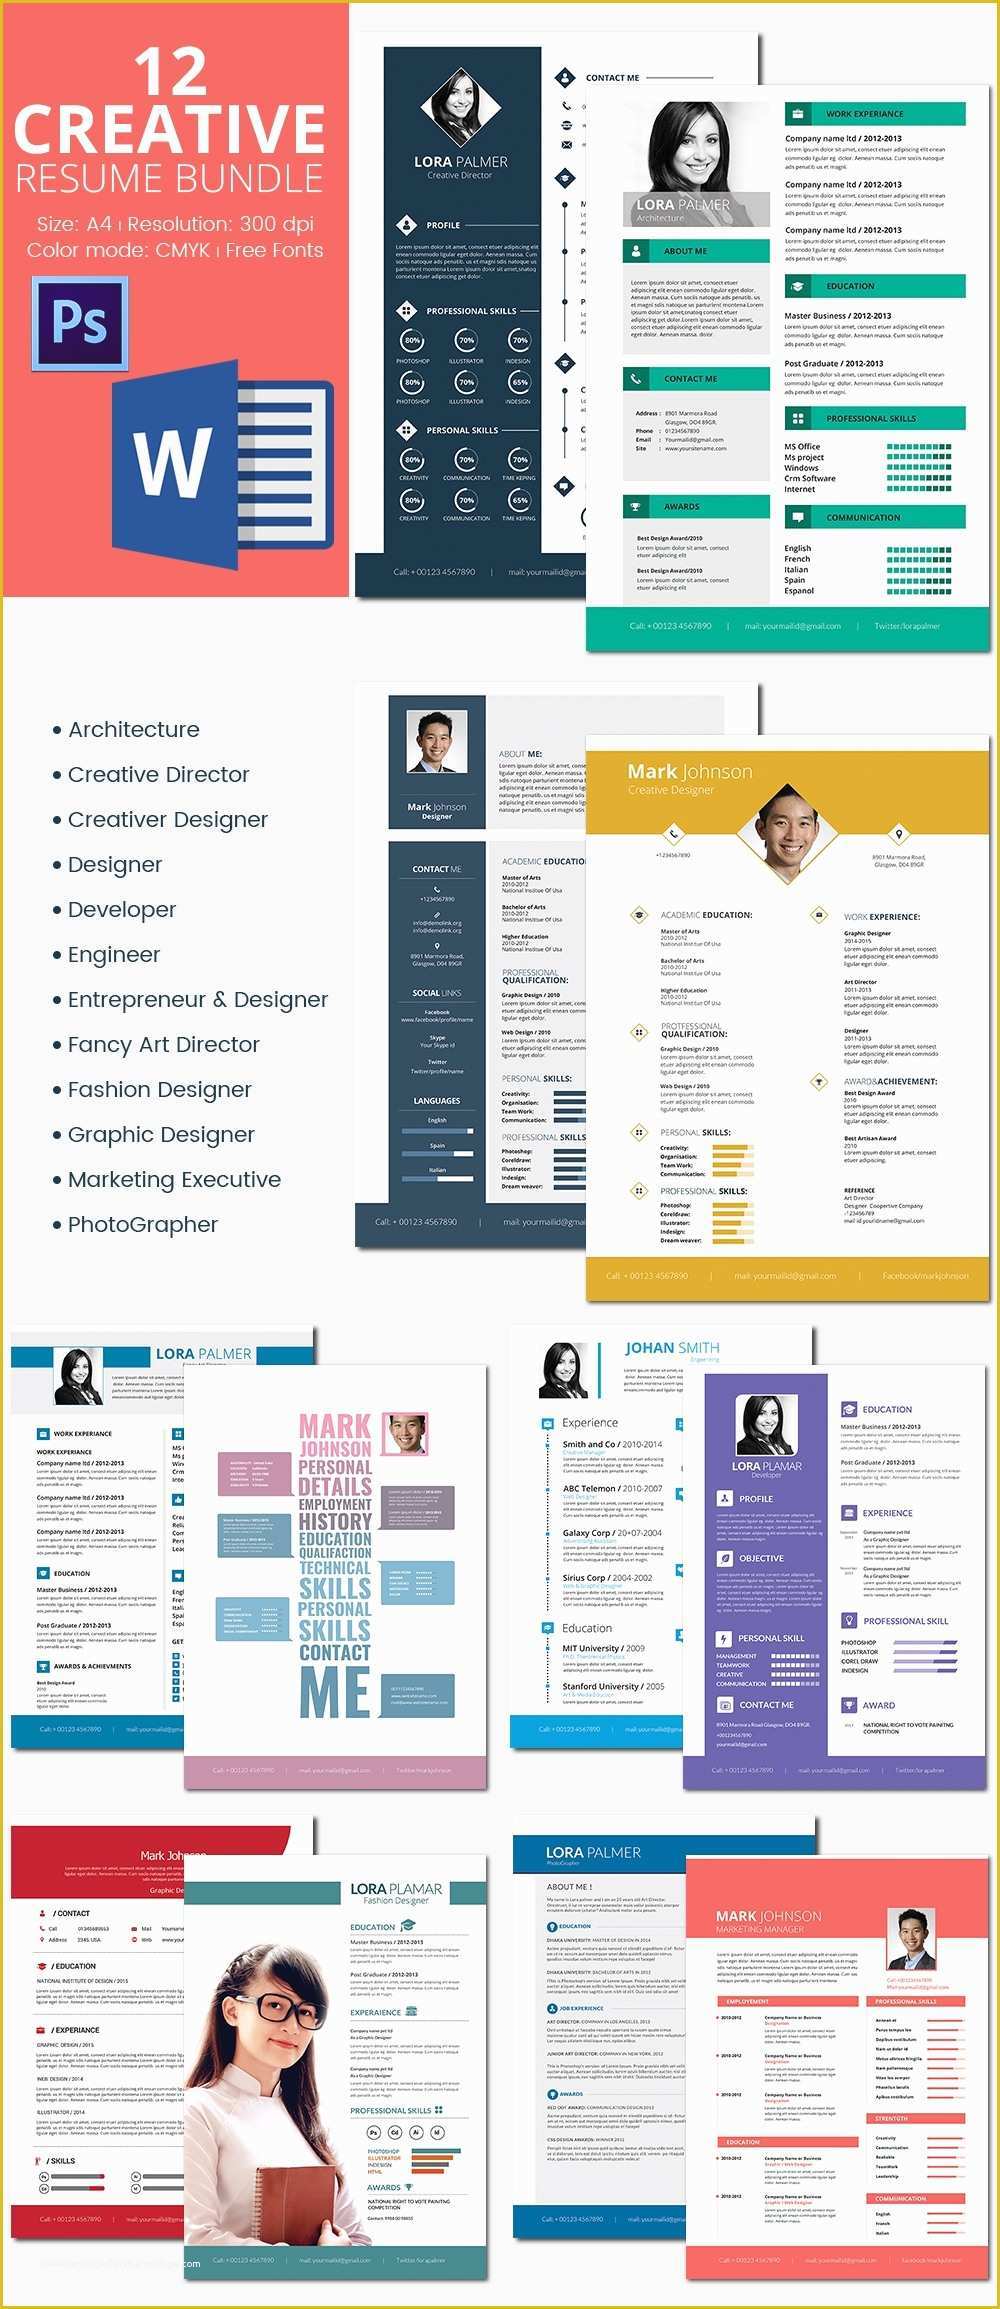 Pdf Resume Template Free Download Of 41 E Page Resume Templates Free Samples Examples